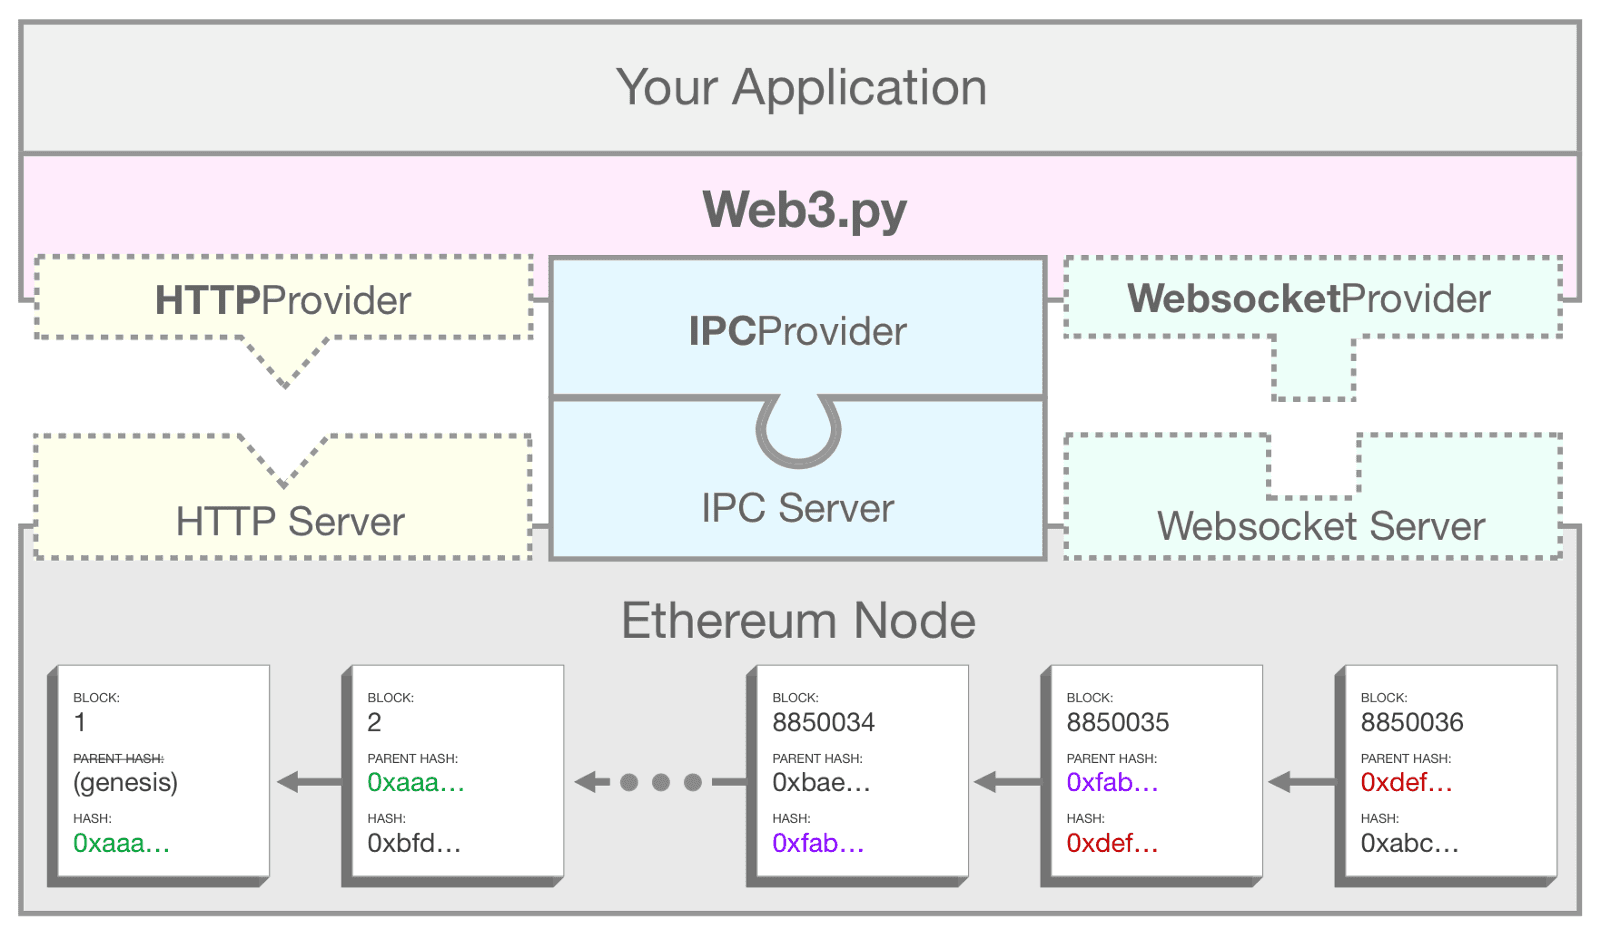 A diagram showing how web3.py uses IPC to connect your application to an Ethereum node